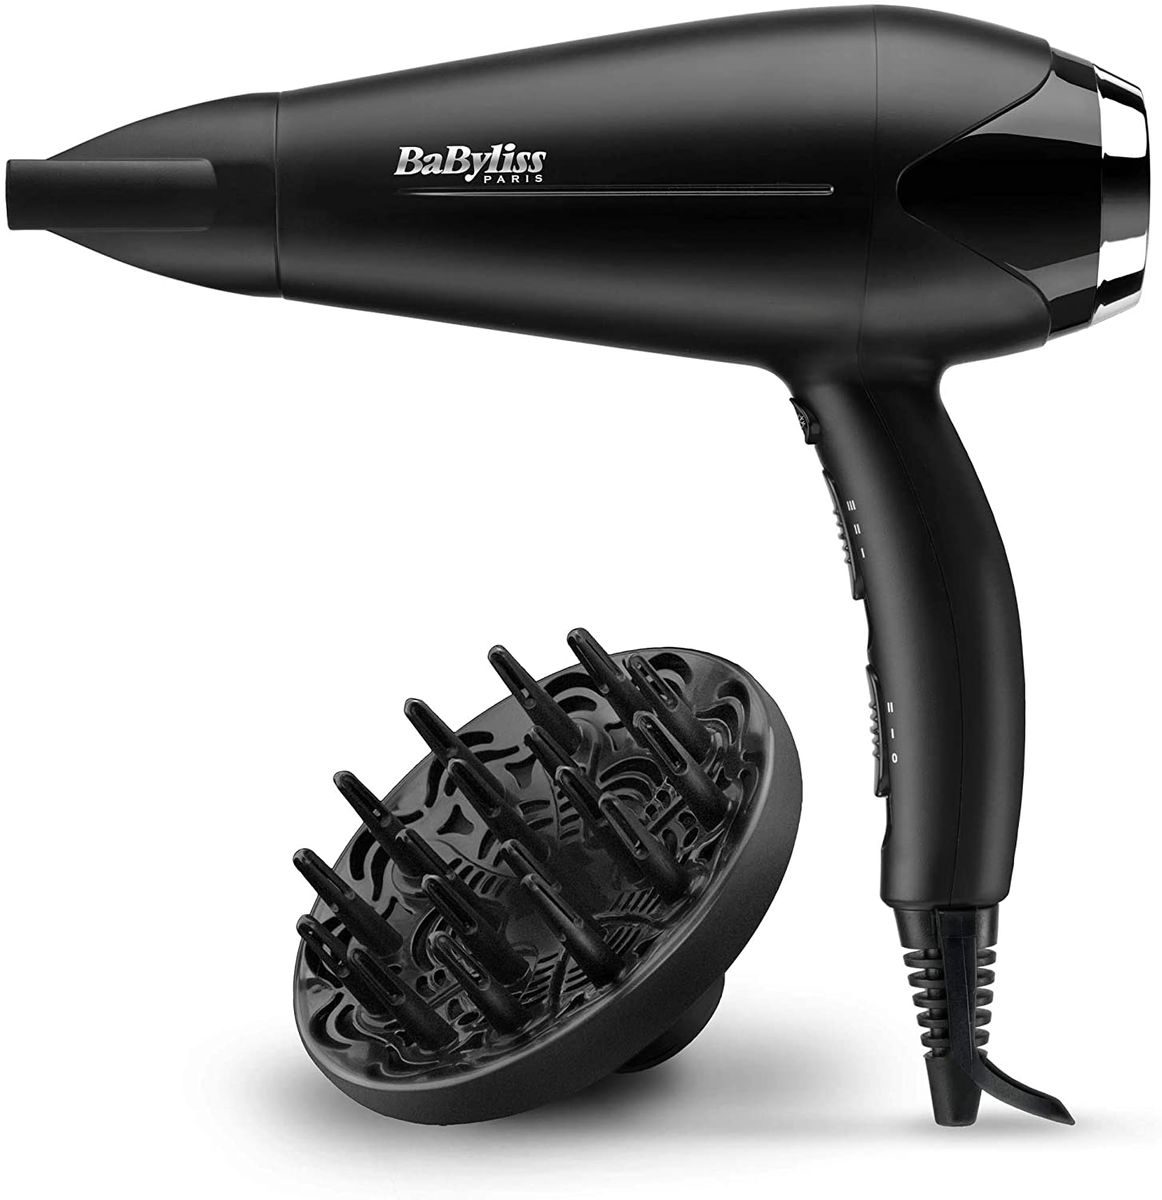 BaByliss Turbo Smooth 2200 hair dryer, black silver, D572DE